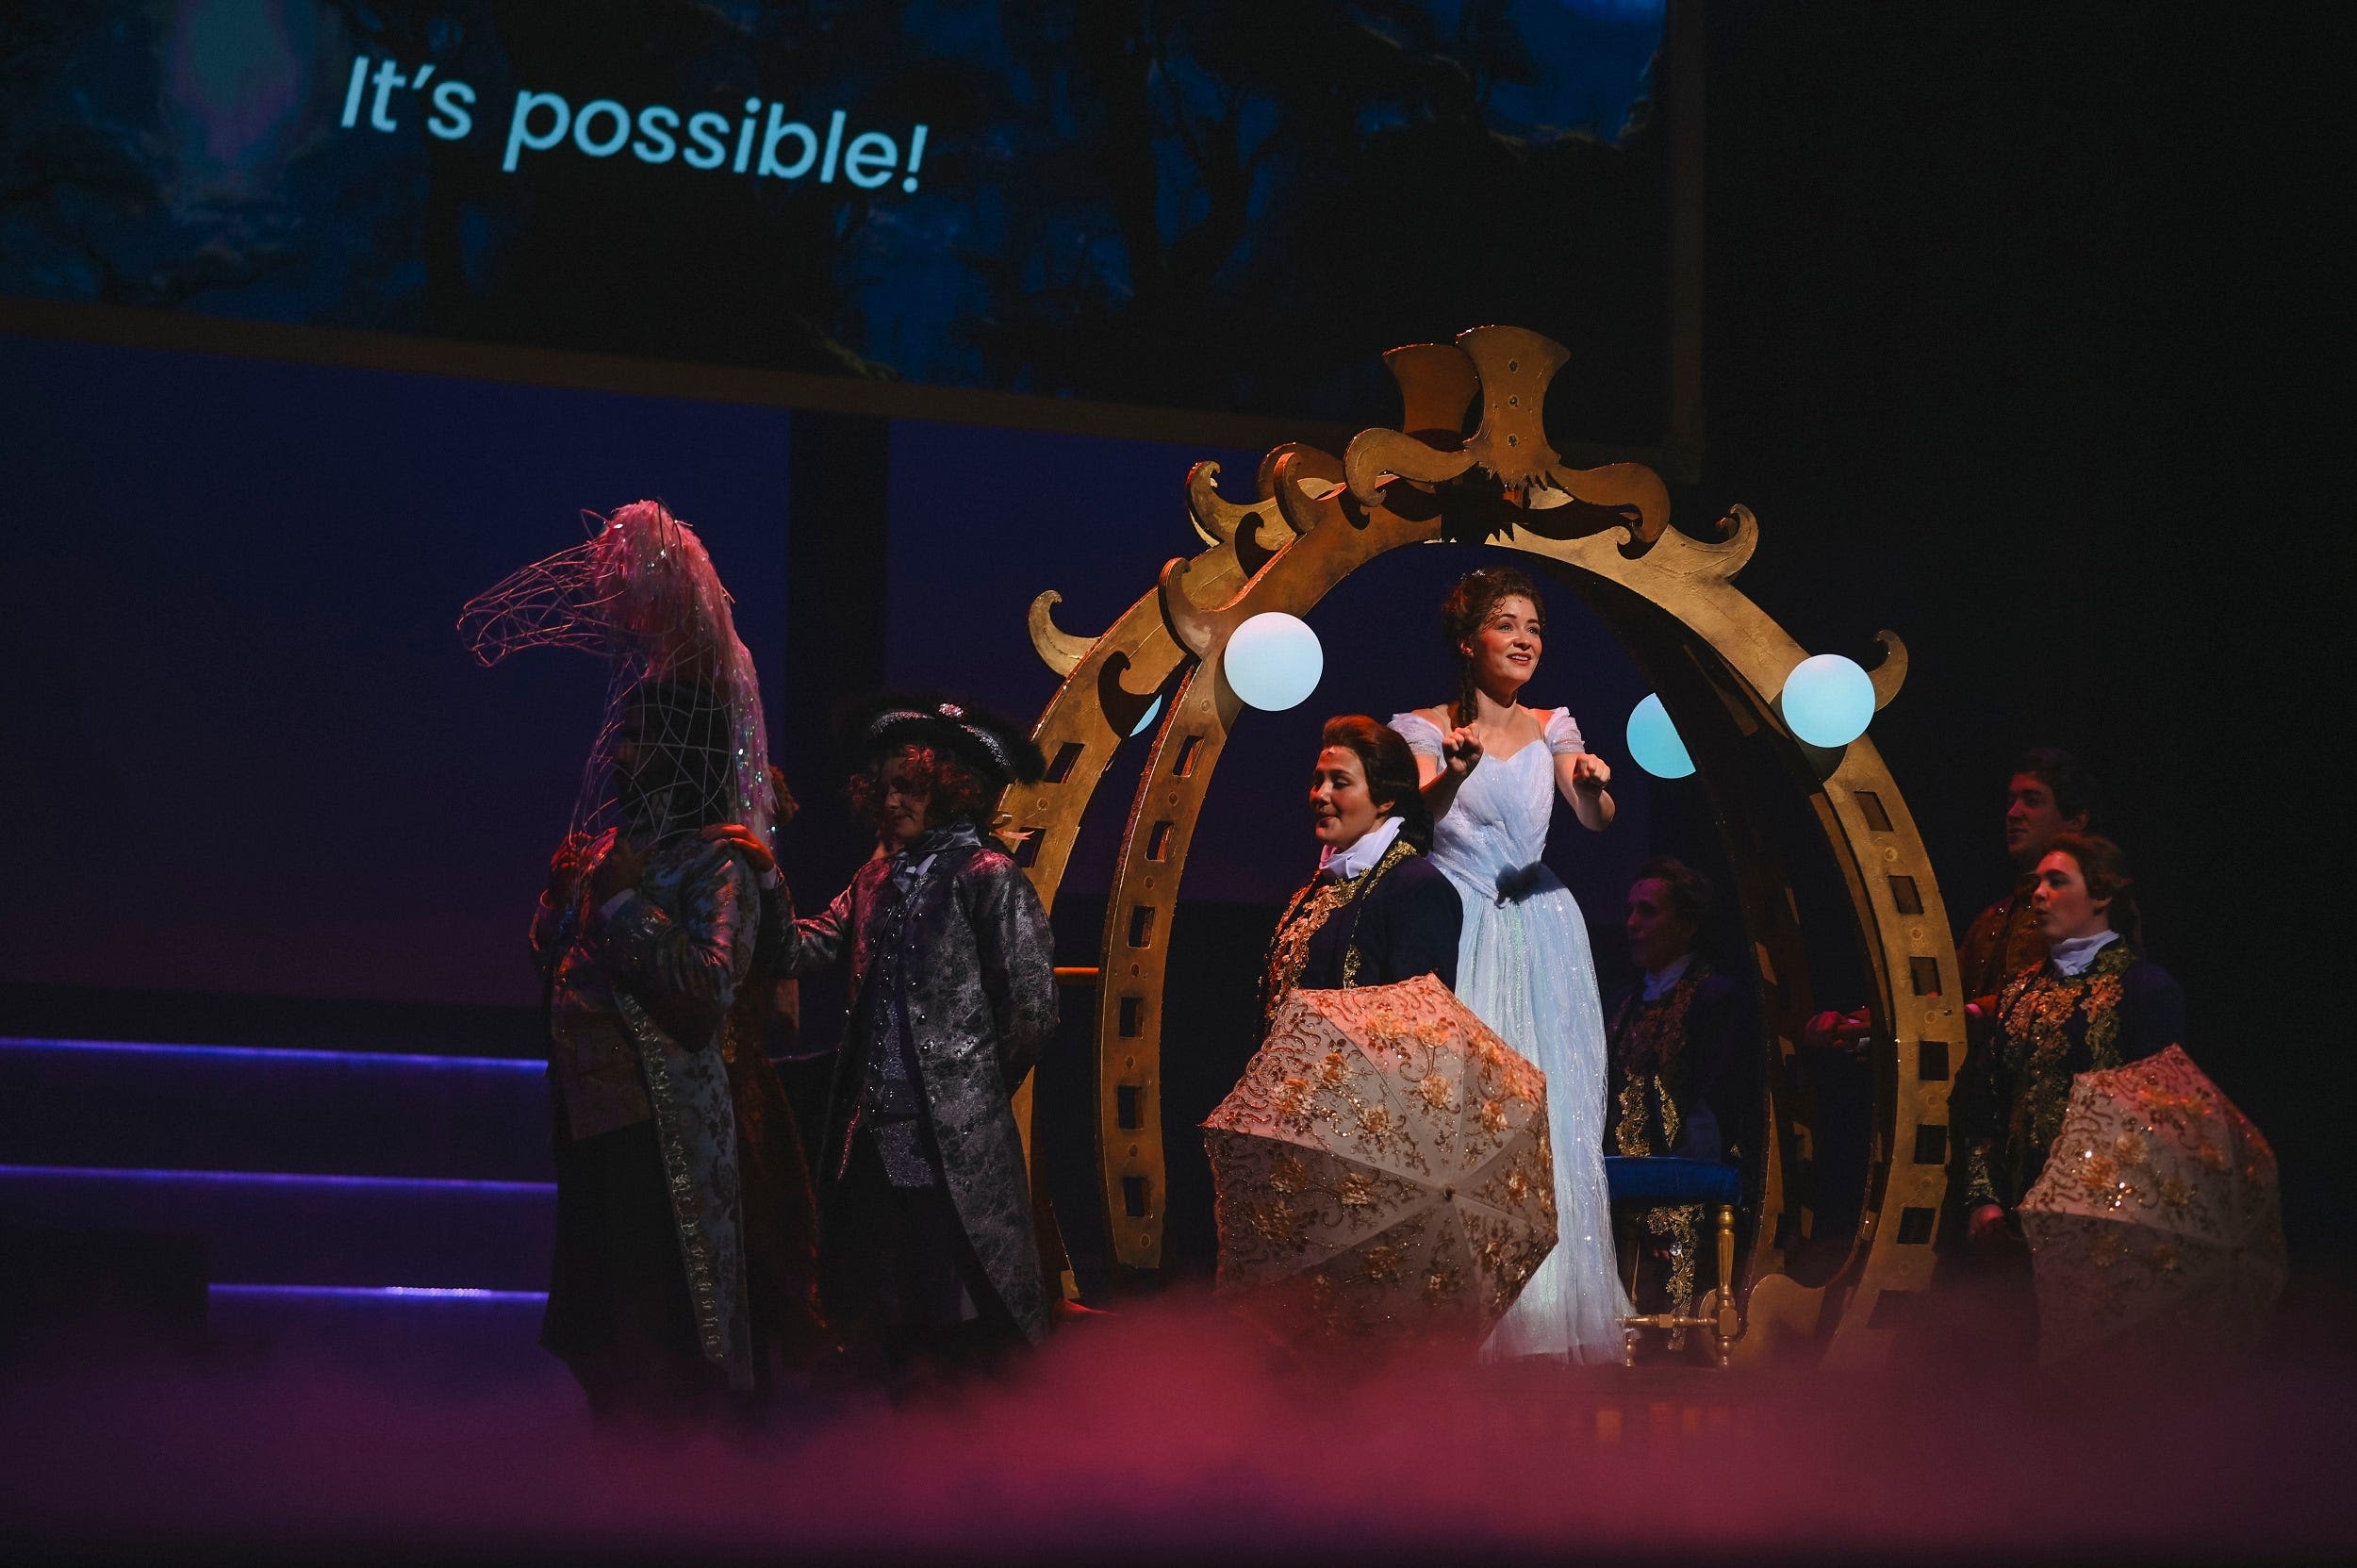 Starring deaf and hearing actors, OKC theater's staging of 'Cinderella' is extra magical